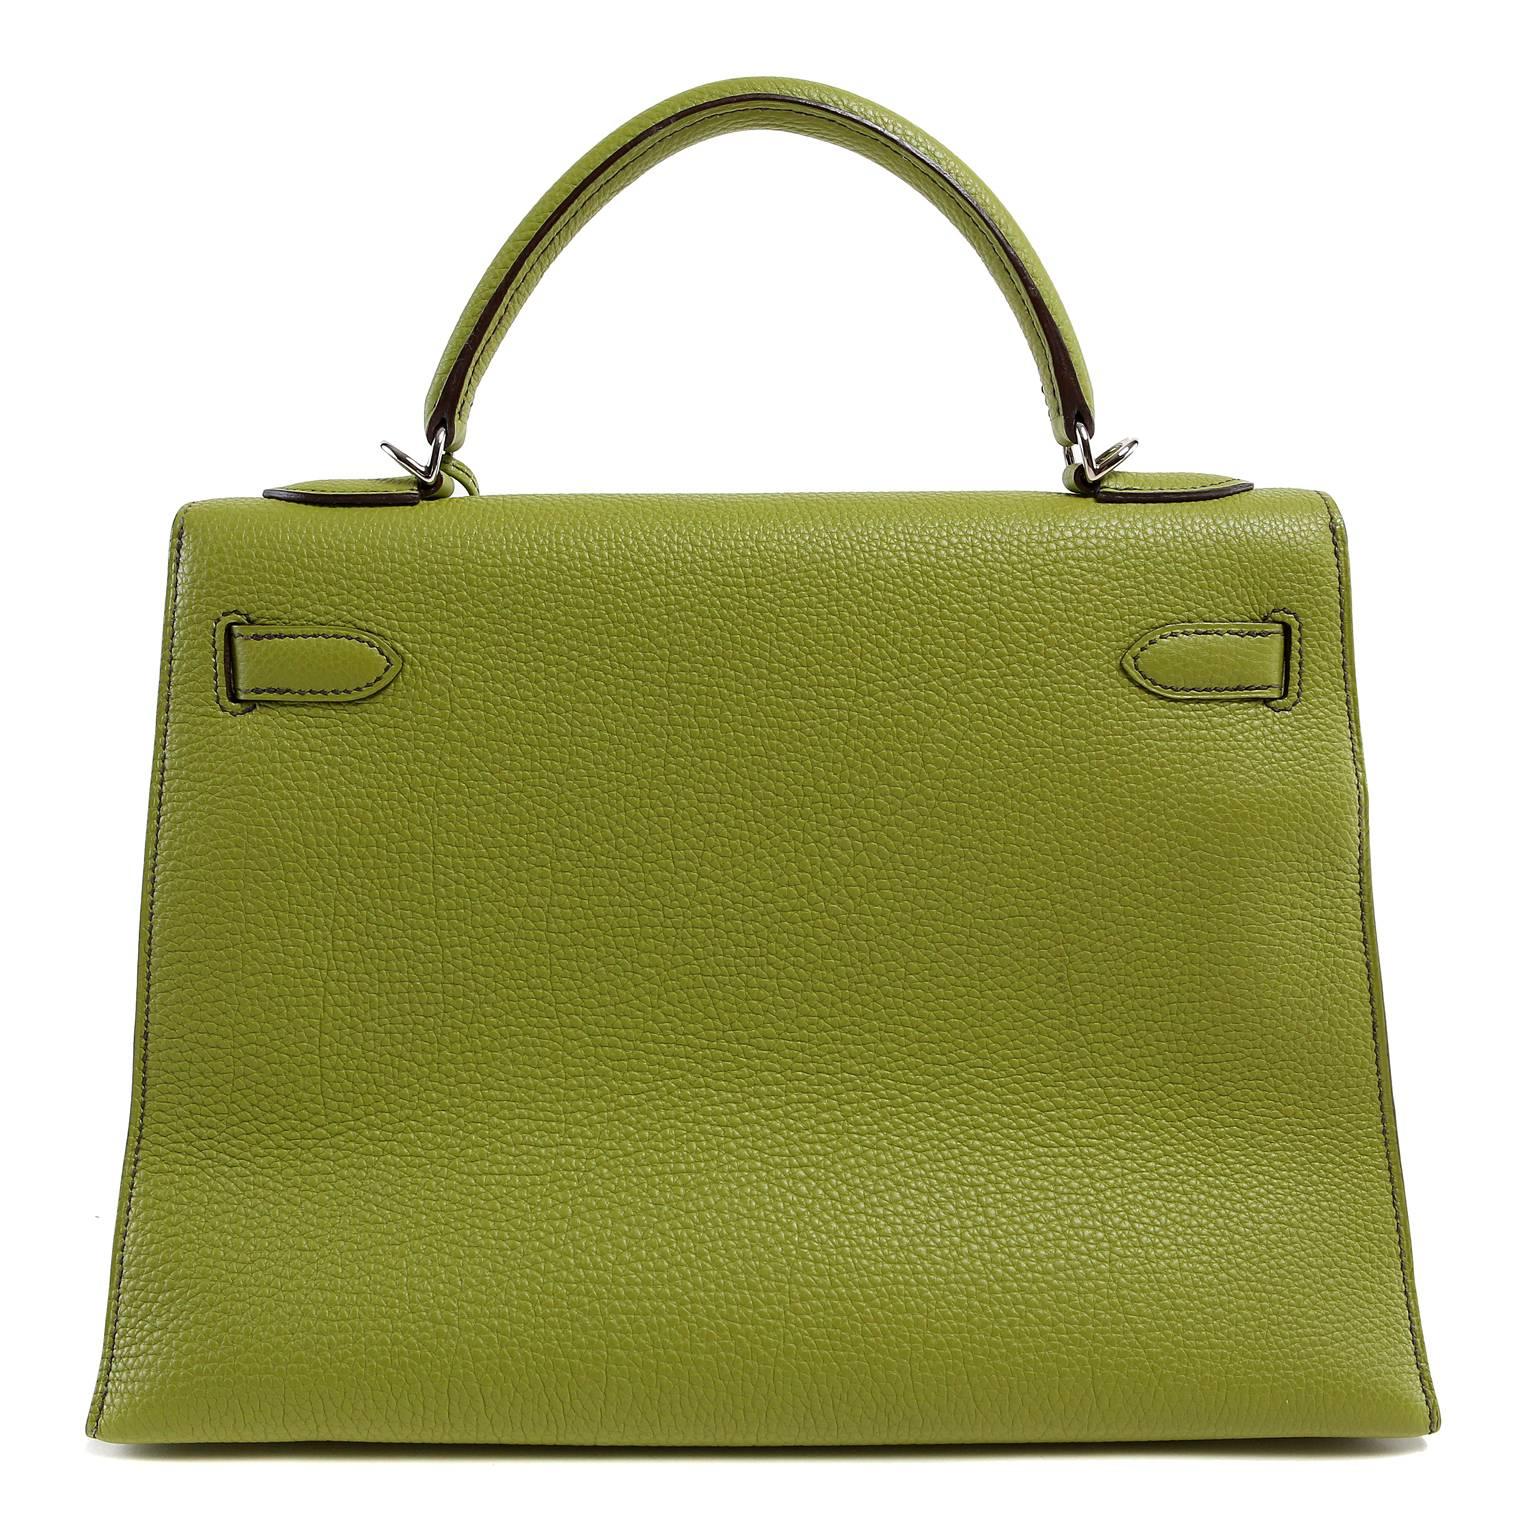 Hermès Vert Anis 32 cm Togo Kelly Bag- MINT condition
  Hermès bags are considered the ultimate luxury item worldwide.  Each piece is handcrafted with waitlists that can exceed a year or more.  Vert Anis is a dream for green lovers- vibrant and